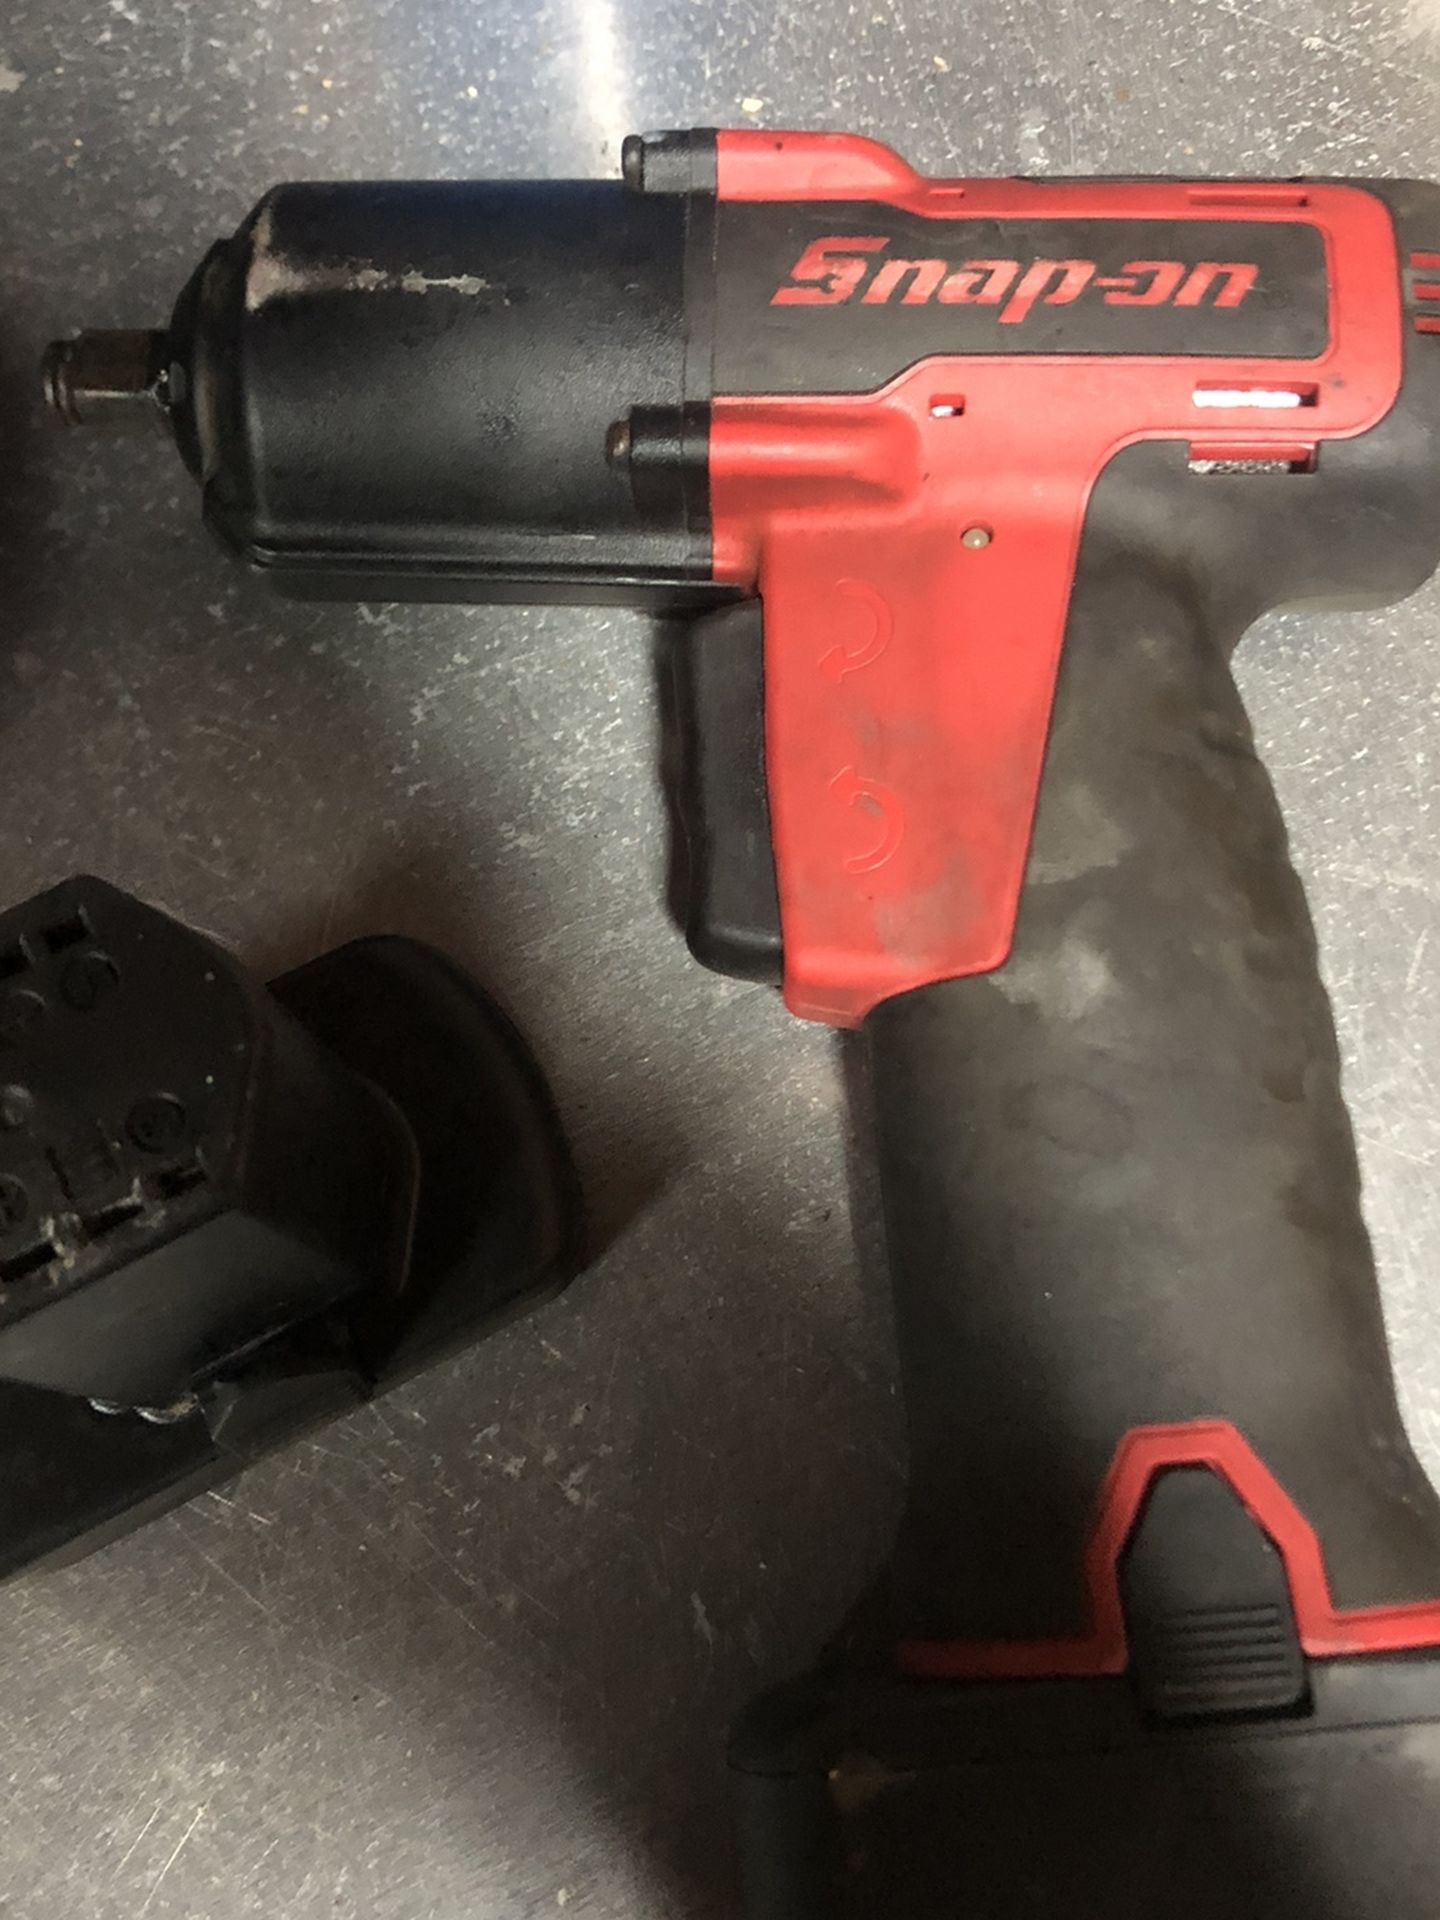 3/8 Snap On Impact Tool And Battery